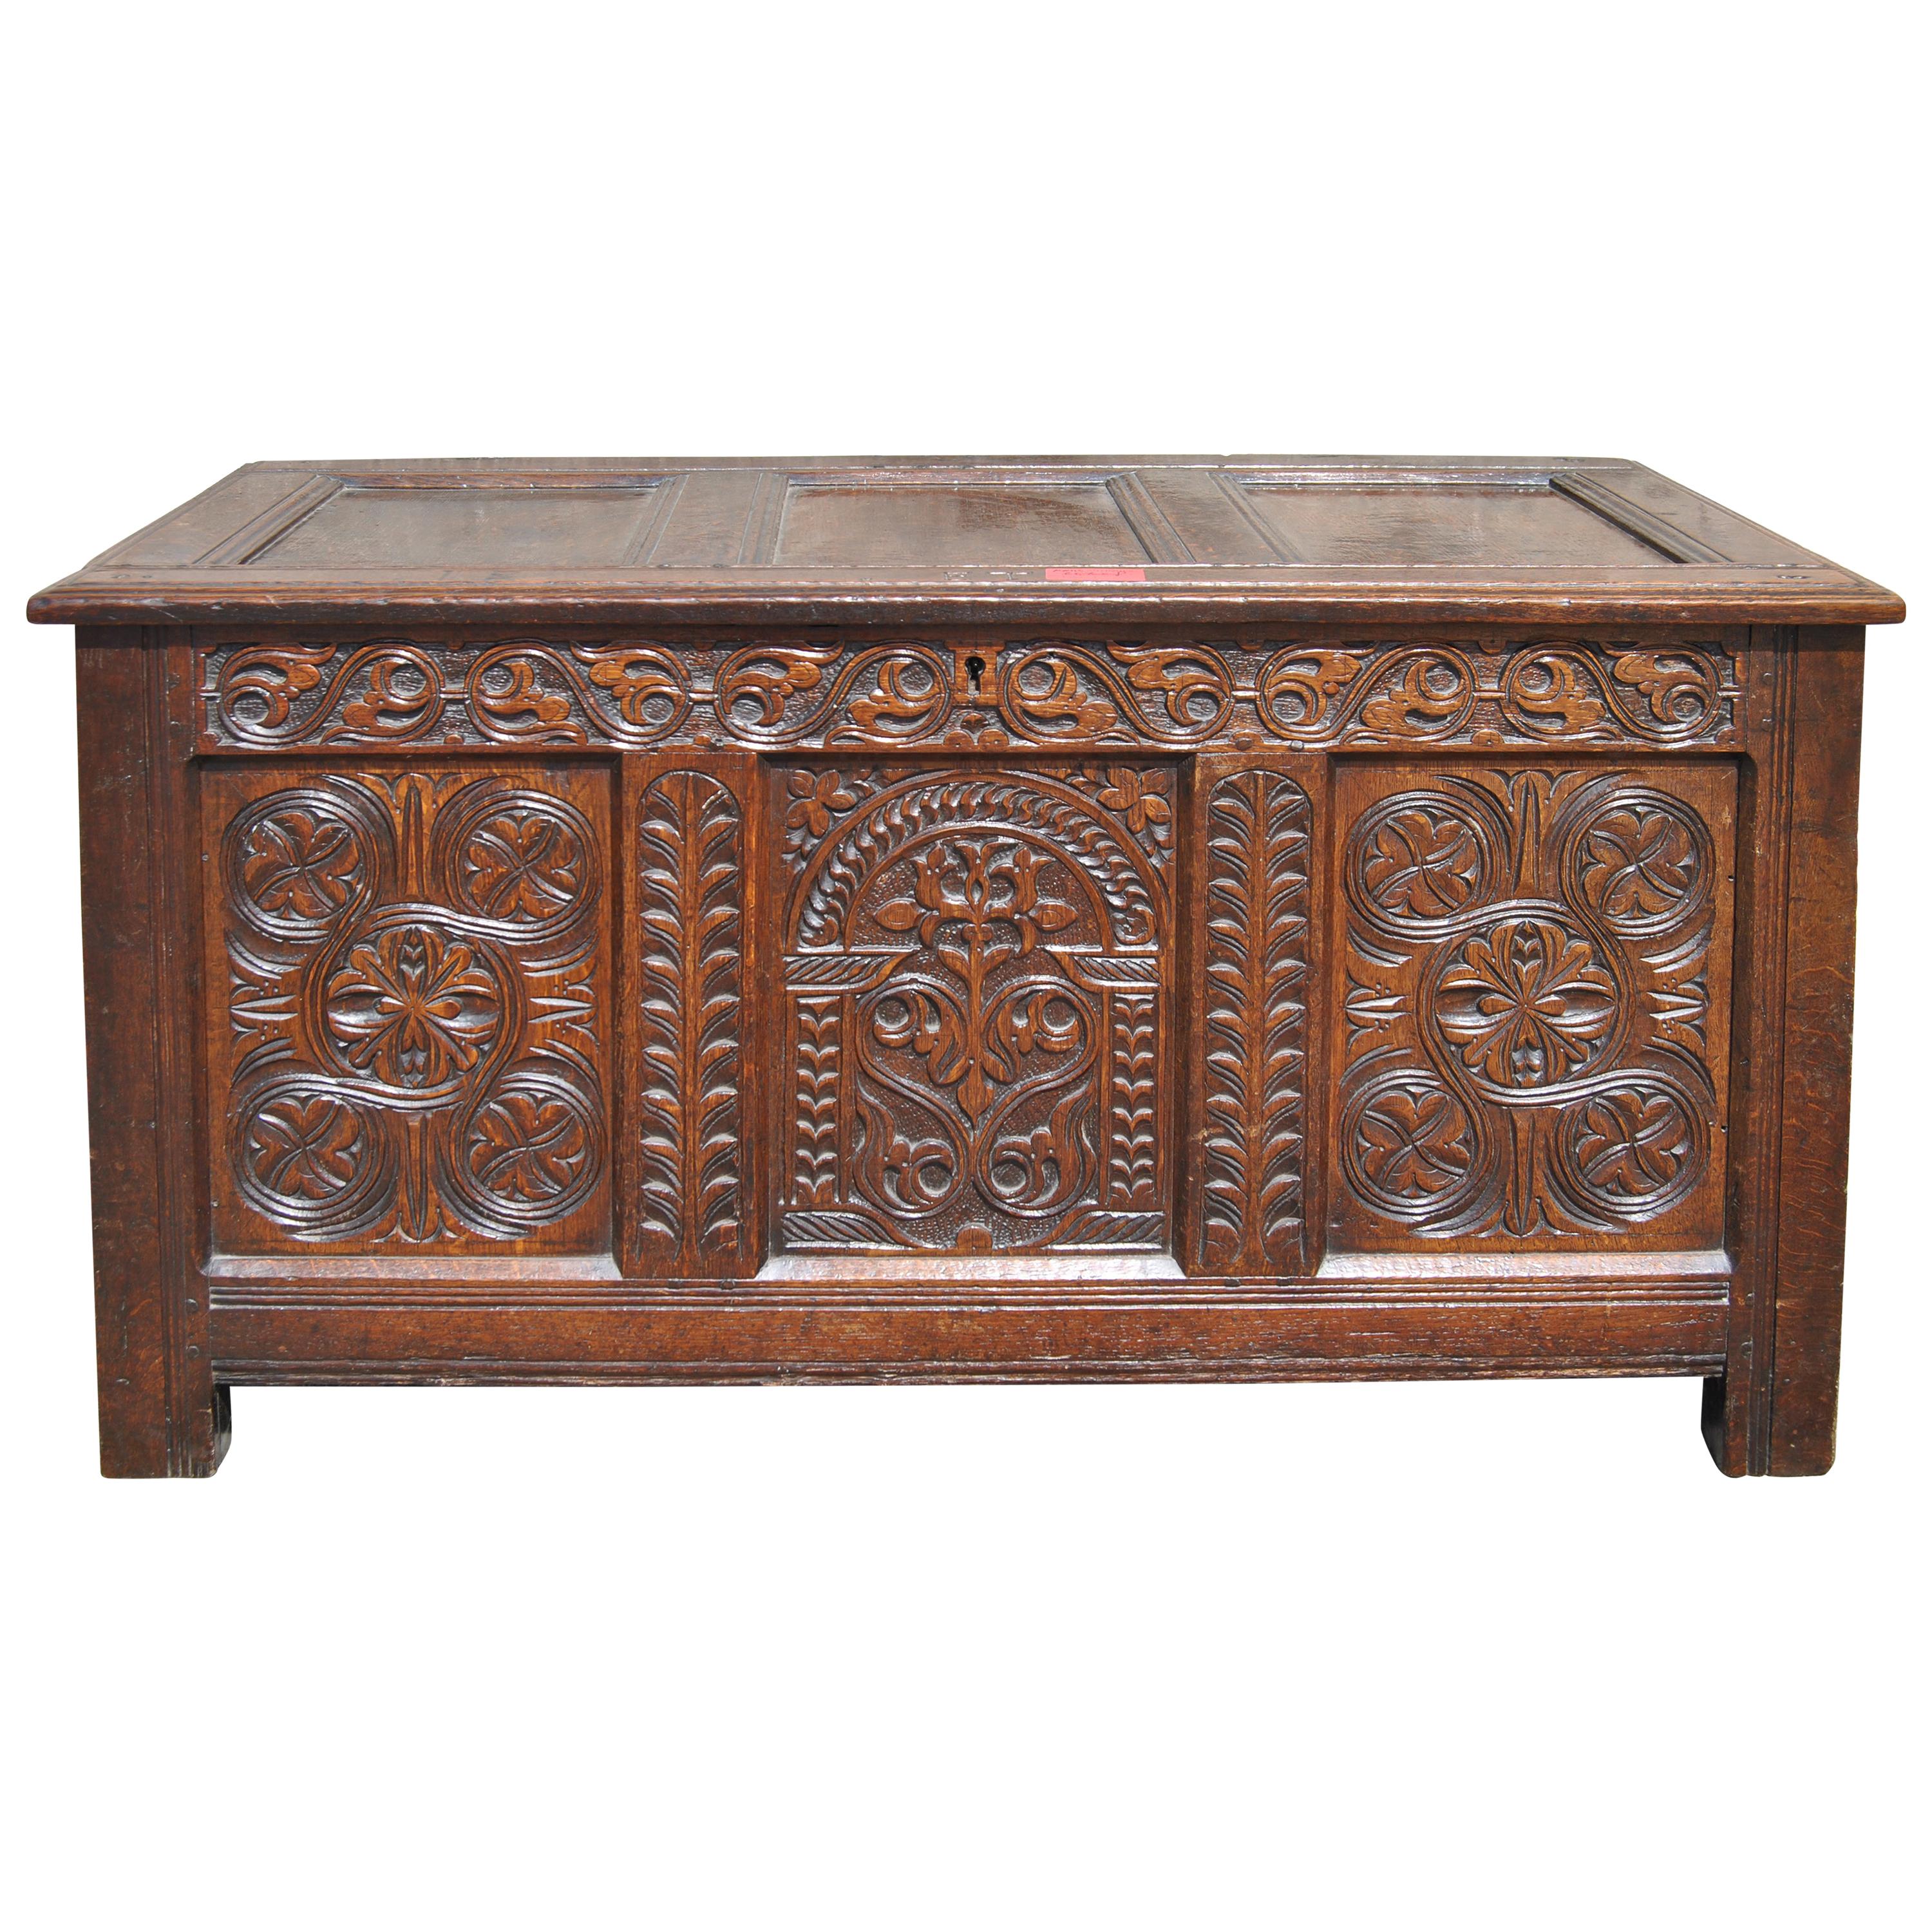 Early 18th Century English Carved Oak Blanket Chest / Coffer